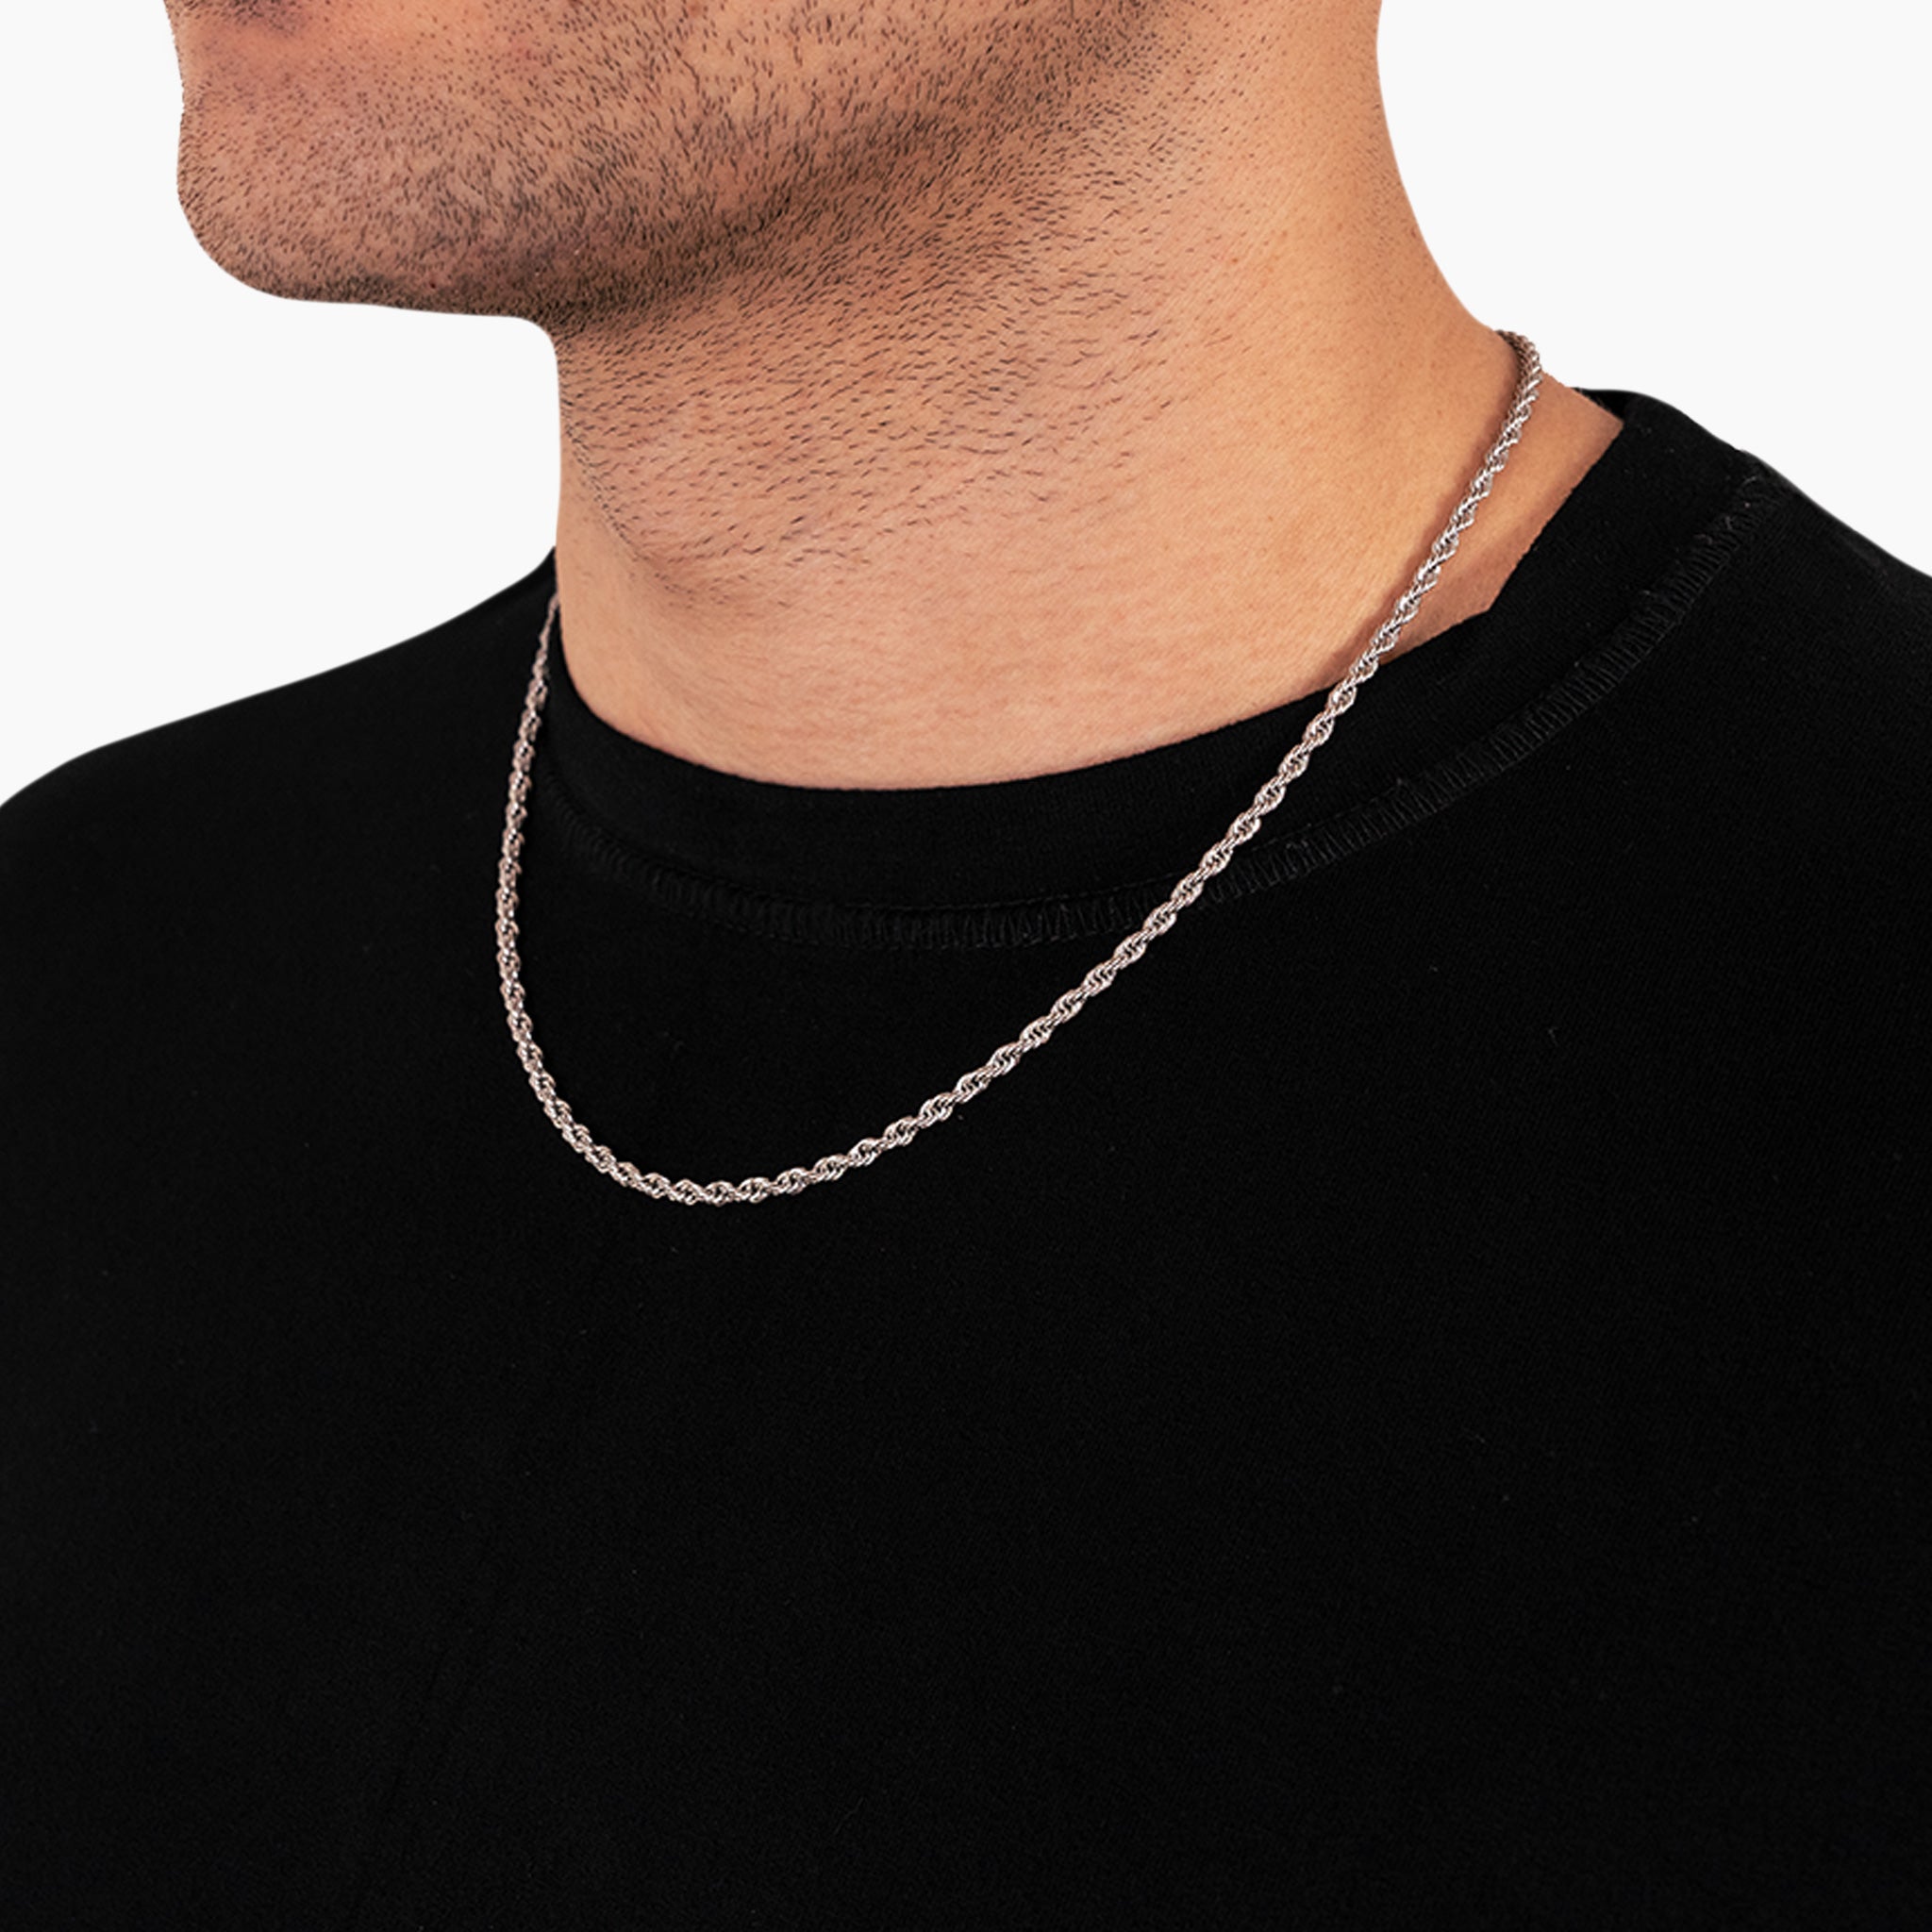 3mm Twisted Rope Chain - Silver